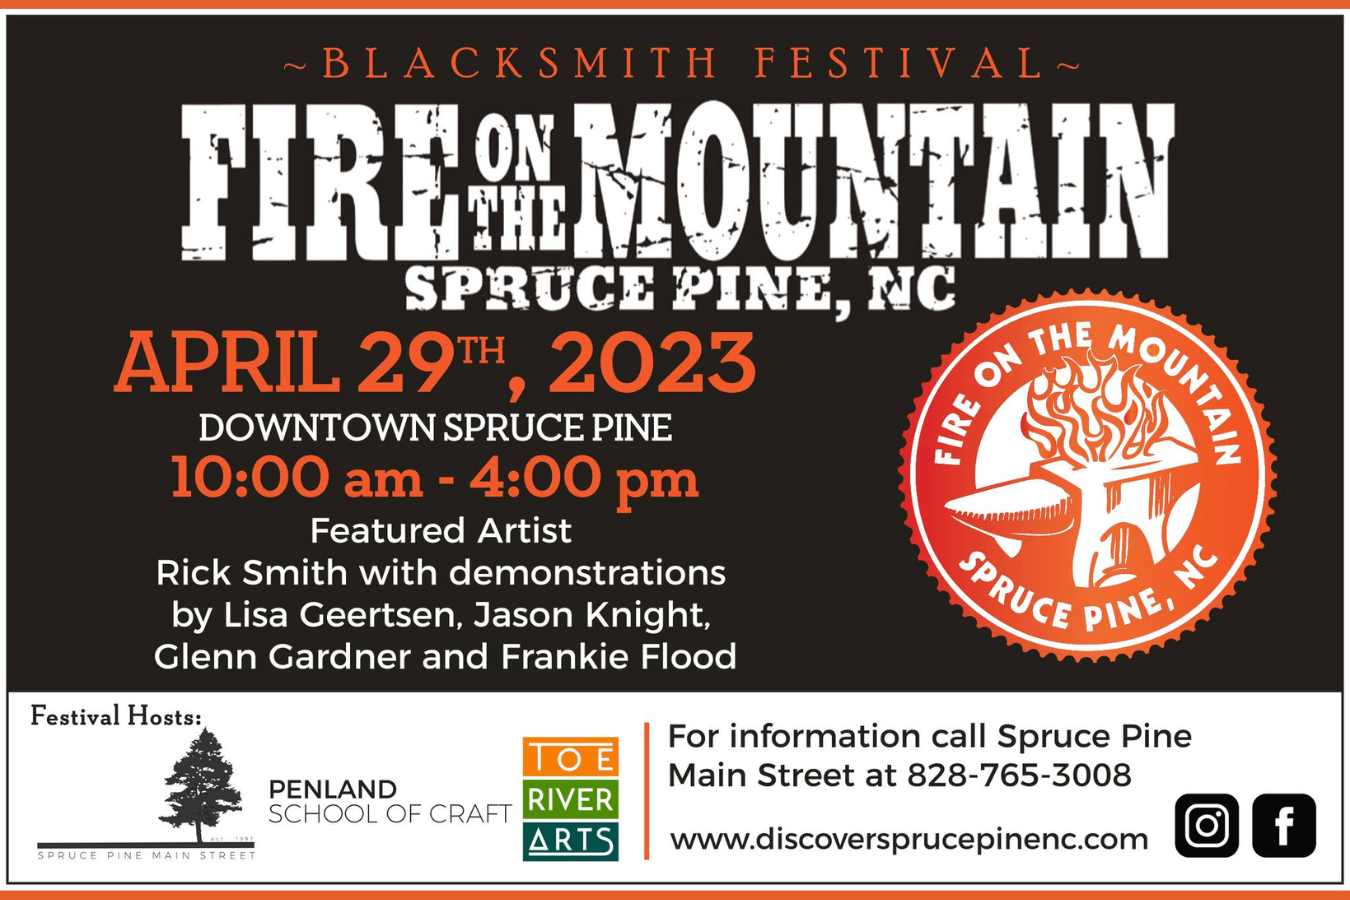 Graphic ad for Fire on the Mountain in Spruce Pine, North Carolina, April 29, 2023.